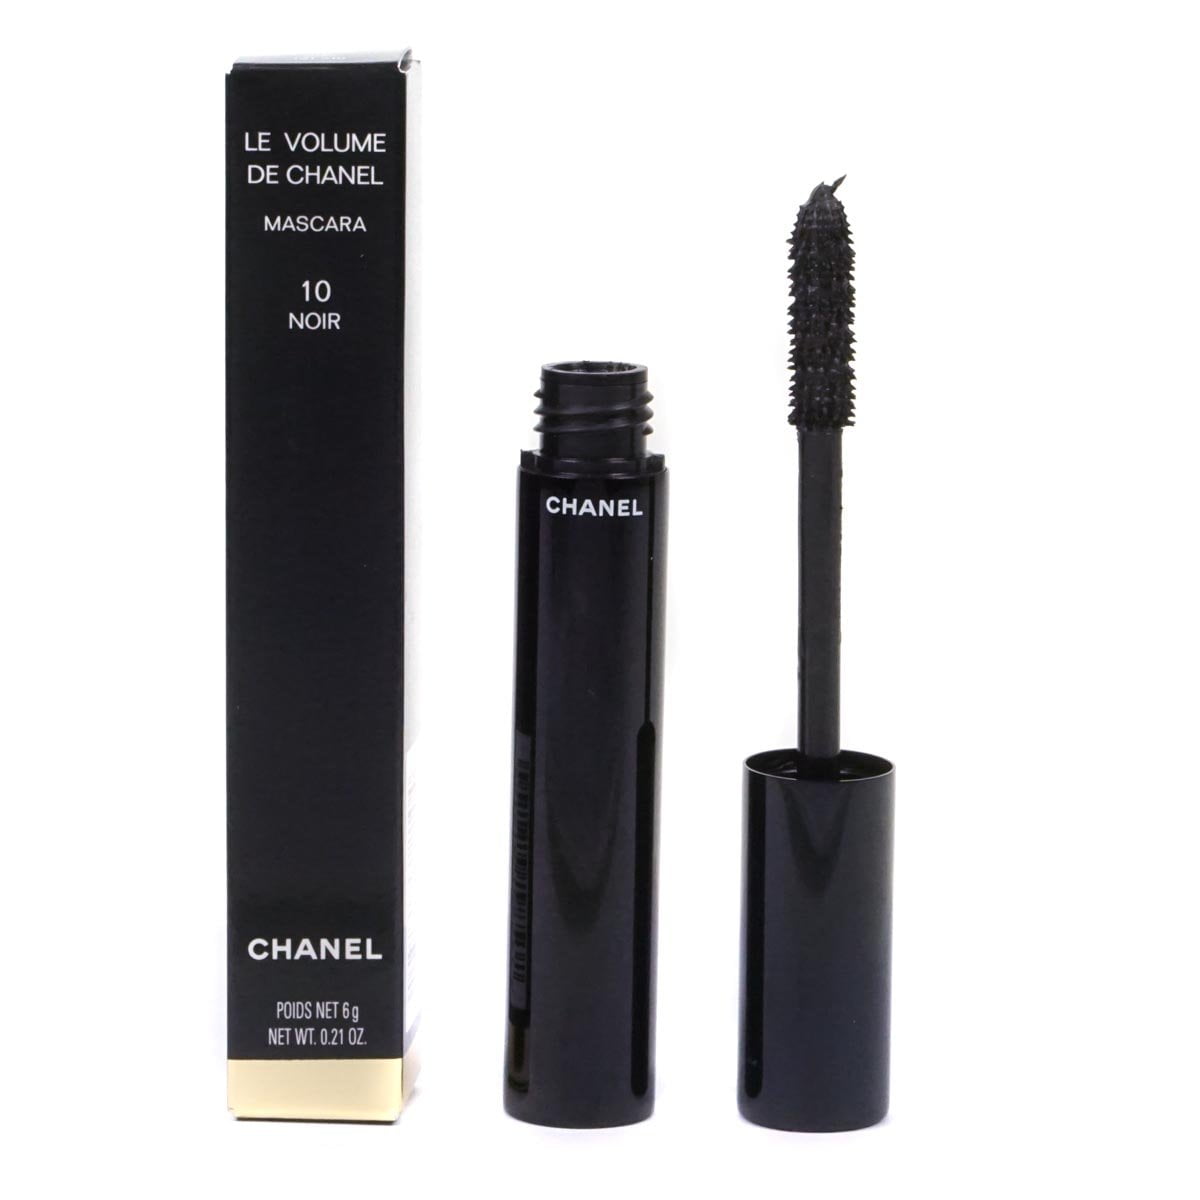 CHANEL Black Mascaras Products for sale